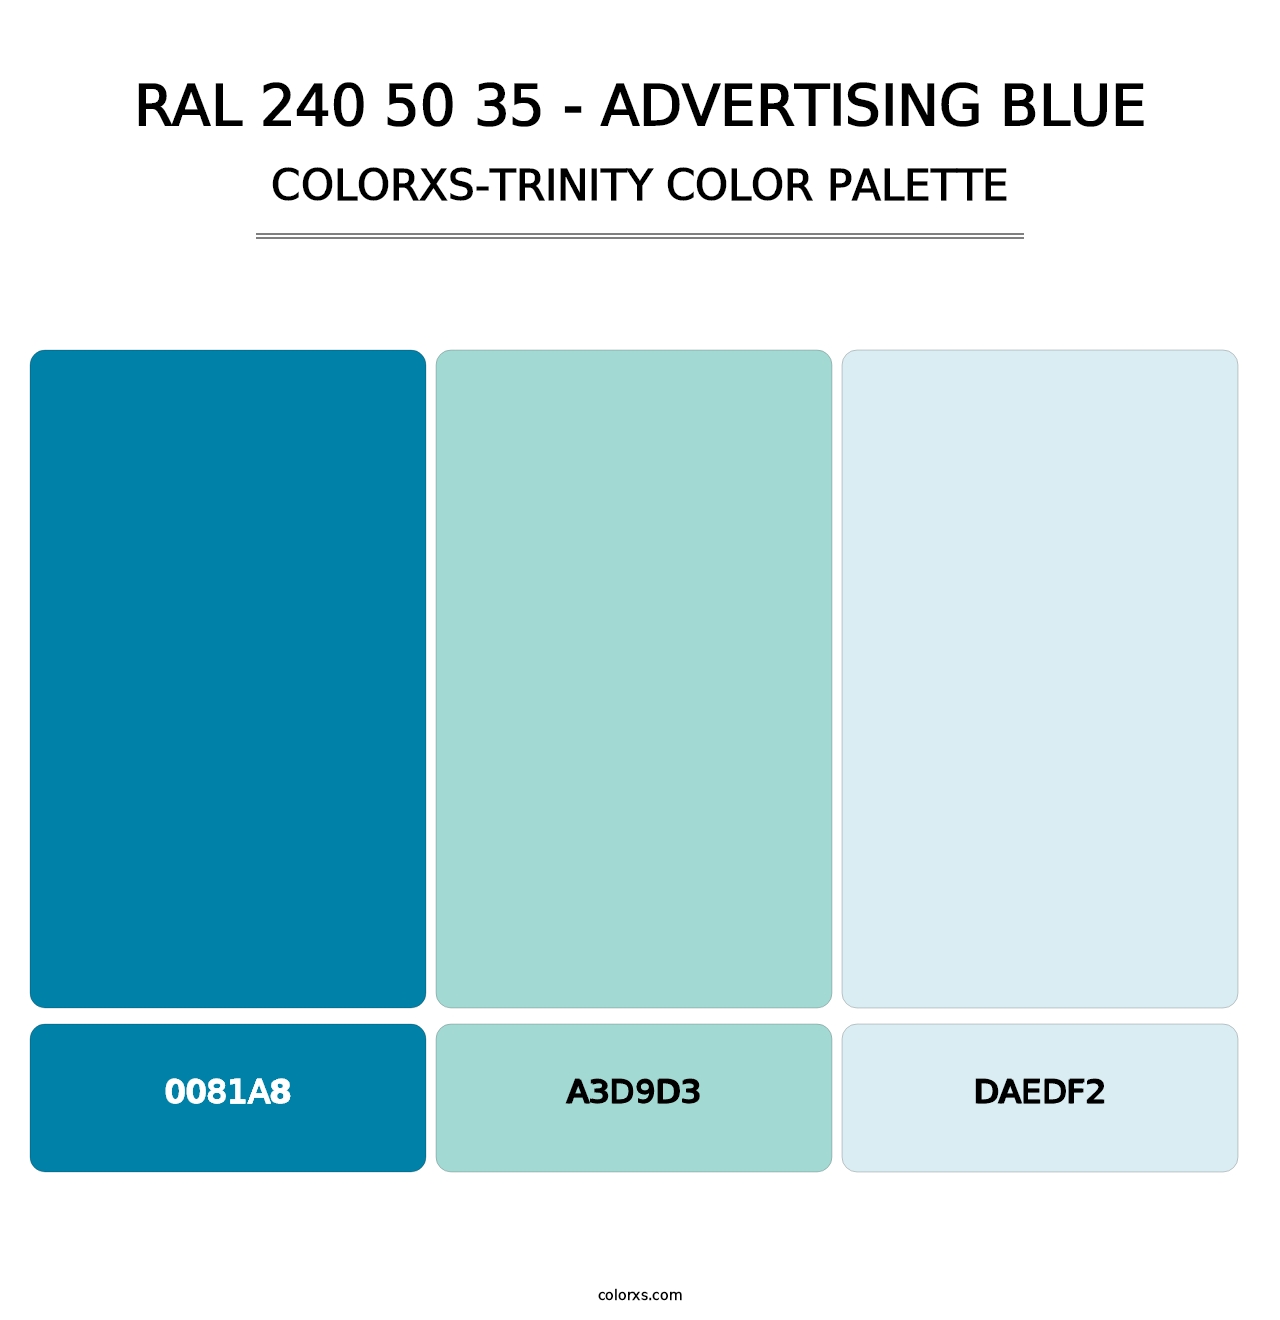 RAL 240 50 35 - Advertising Blue - Colorxs Trinity Palette